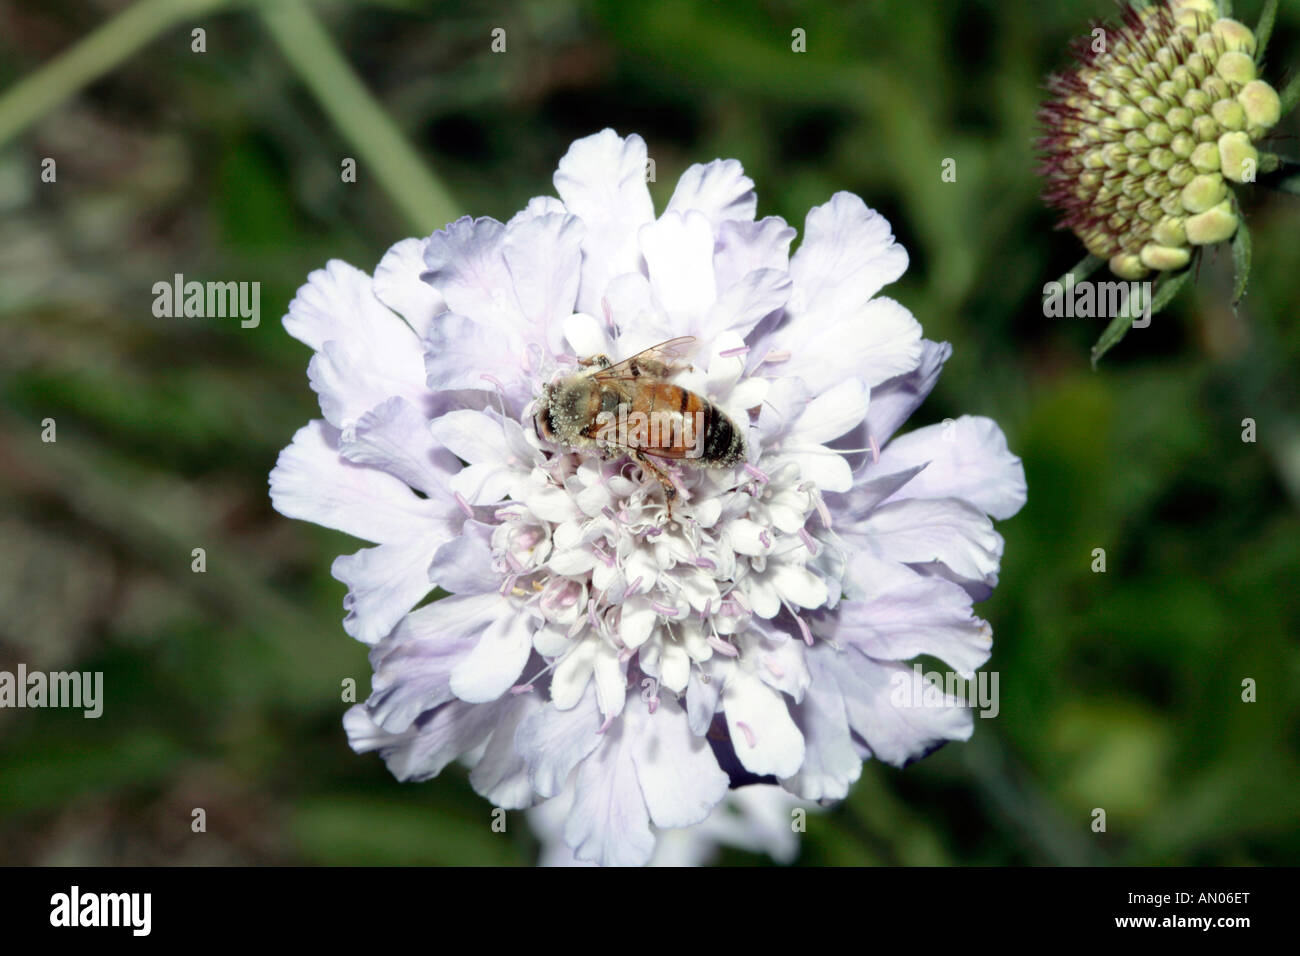 Honey Bee covered in pollen on Cape Scabious, Pincushion, Koringblom- Scabiosa africana-Family Dipsacaceae Stock Photo